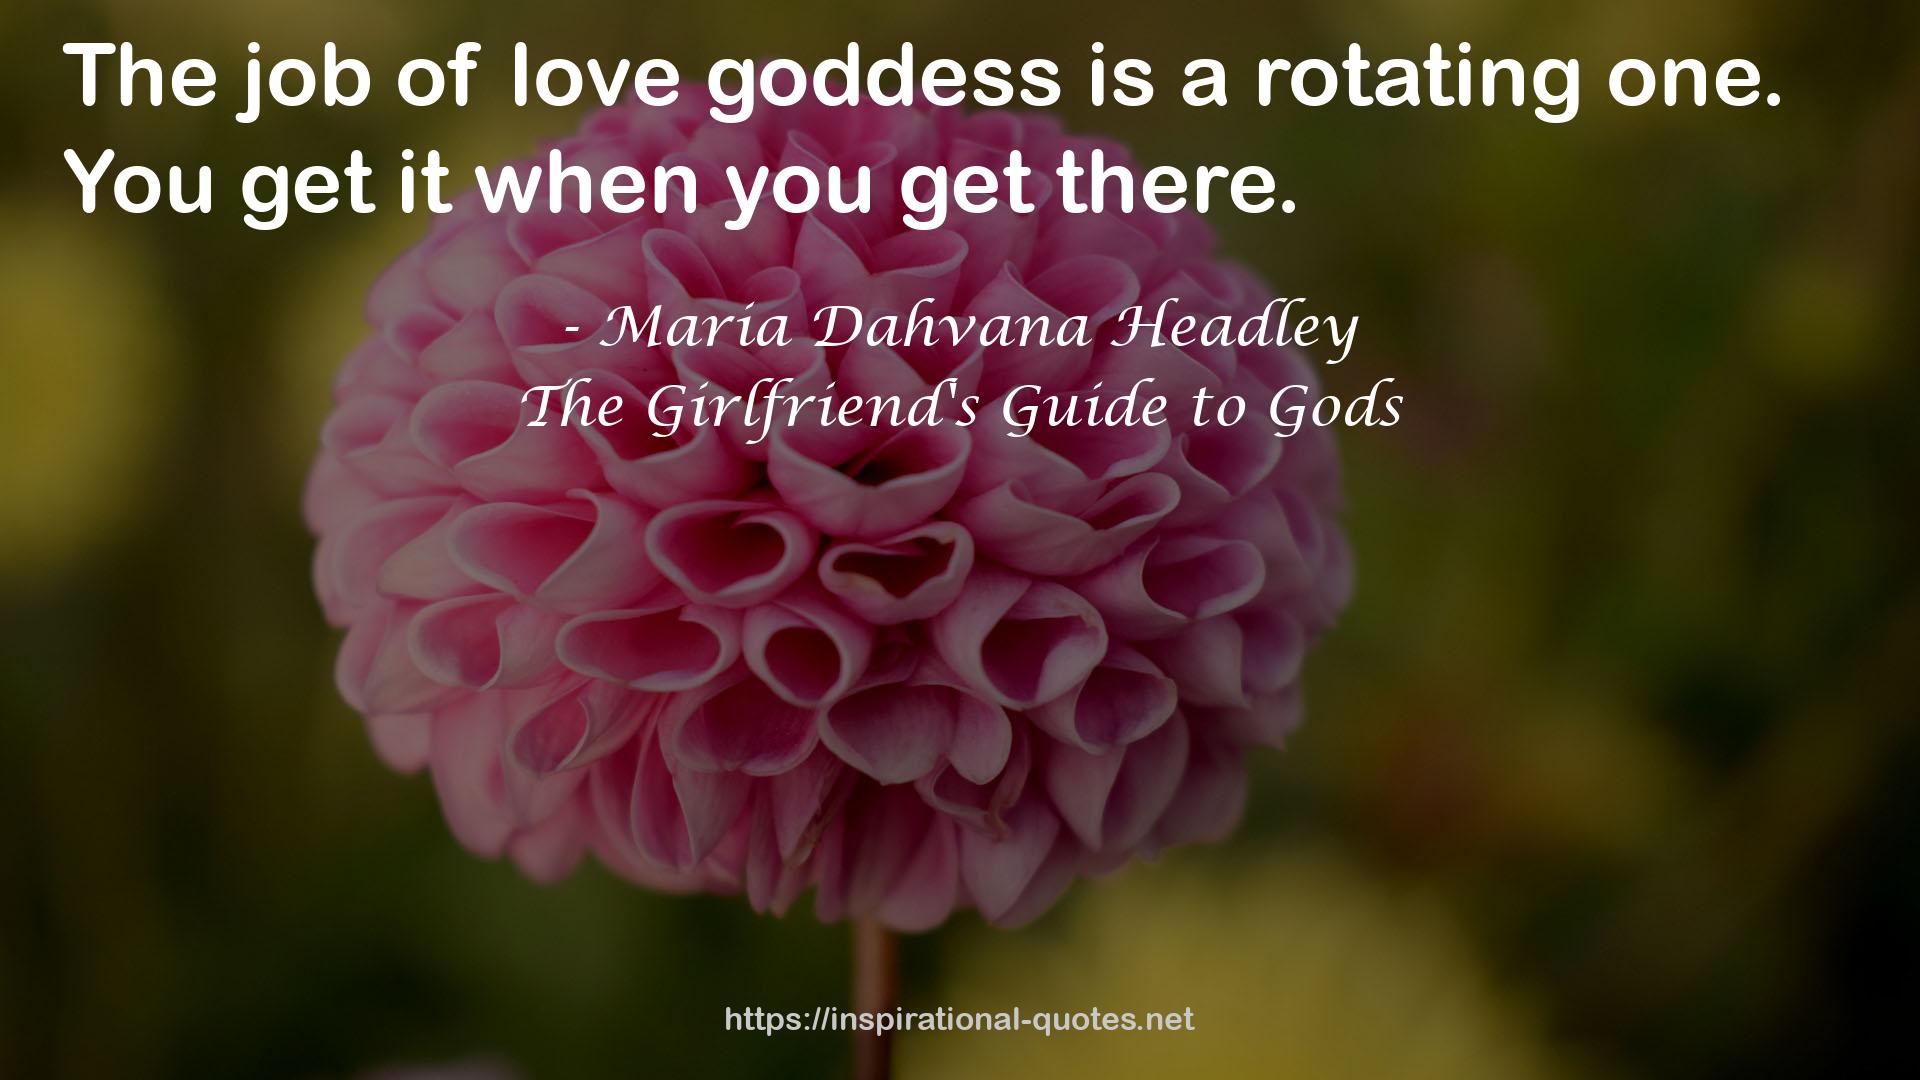 The Girlfriend's Guide to Gods QUOTES